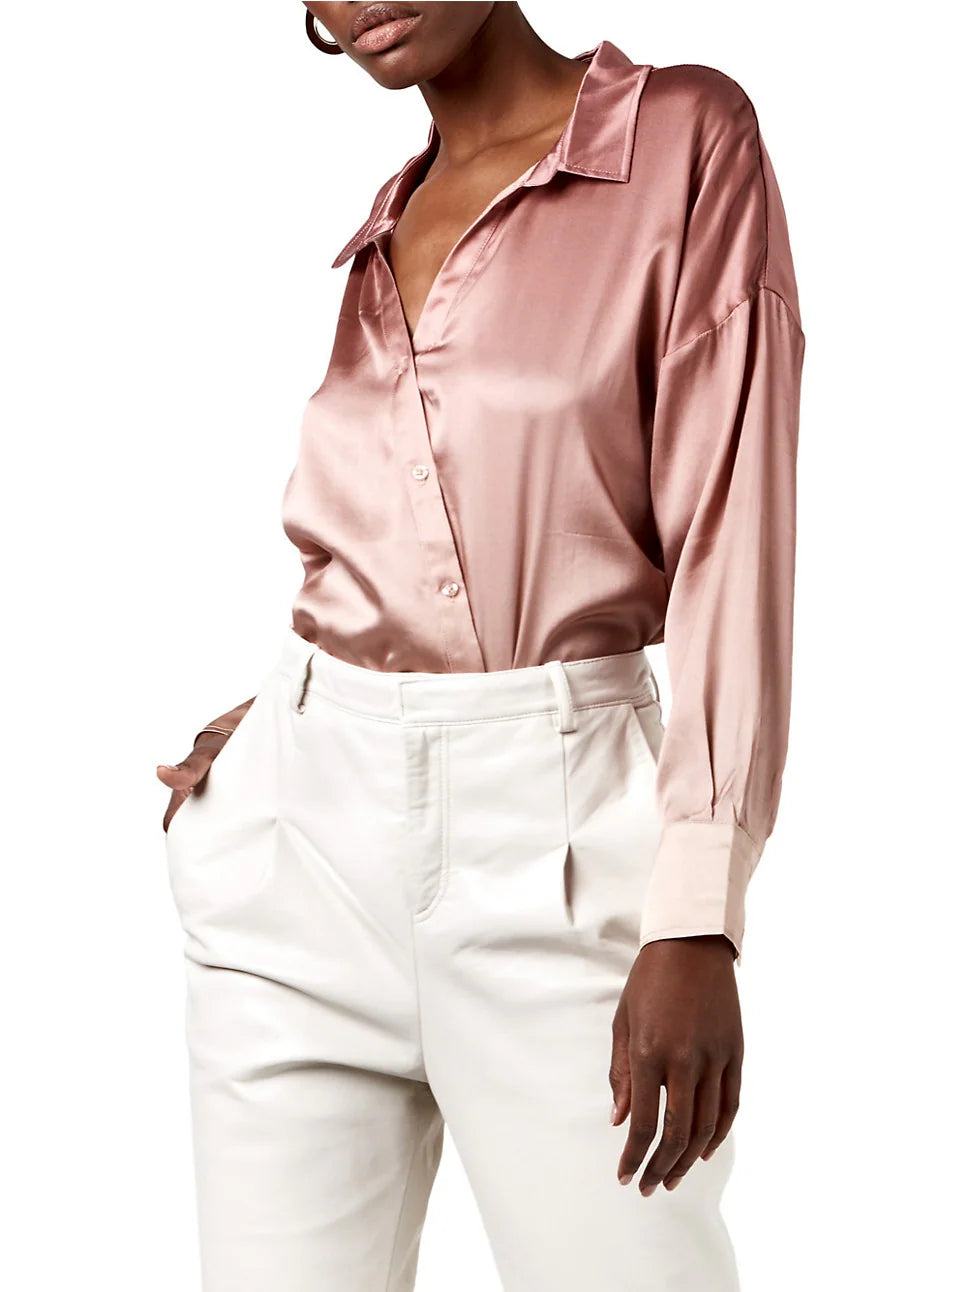 Body picture of a model using the ASbyDF Tramonto Blouse Mauve - CT Grace